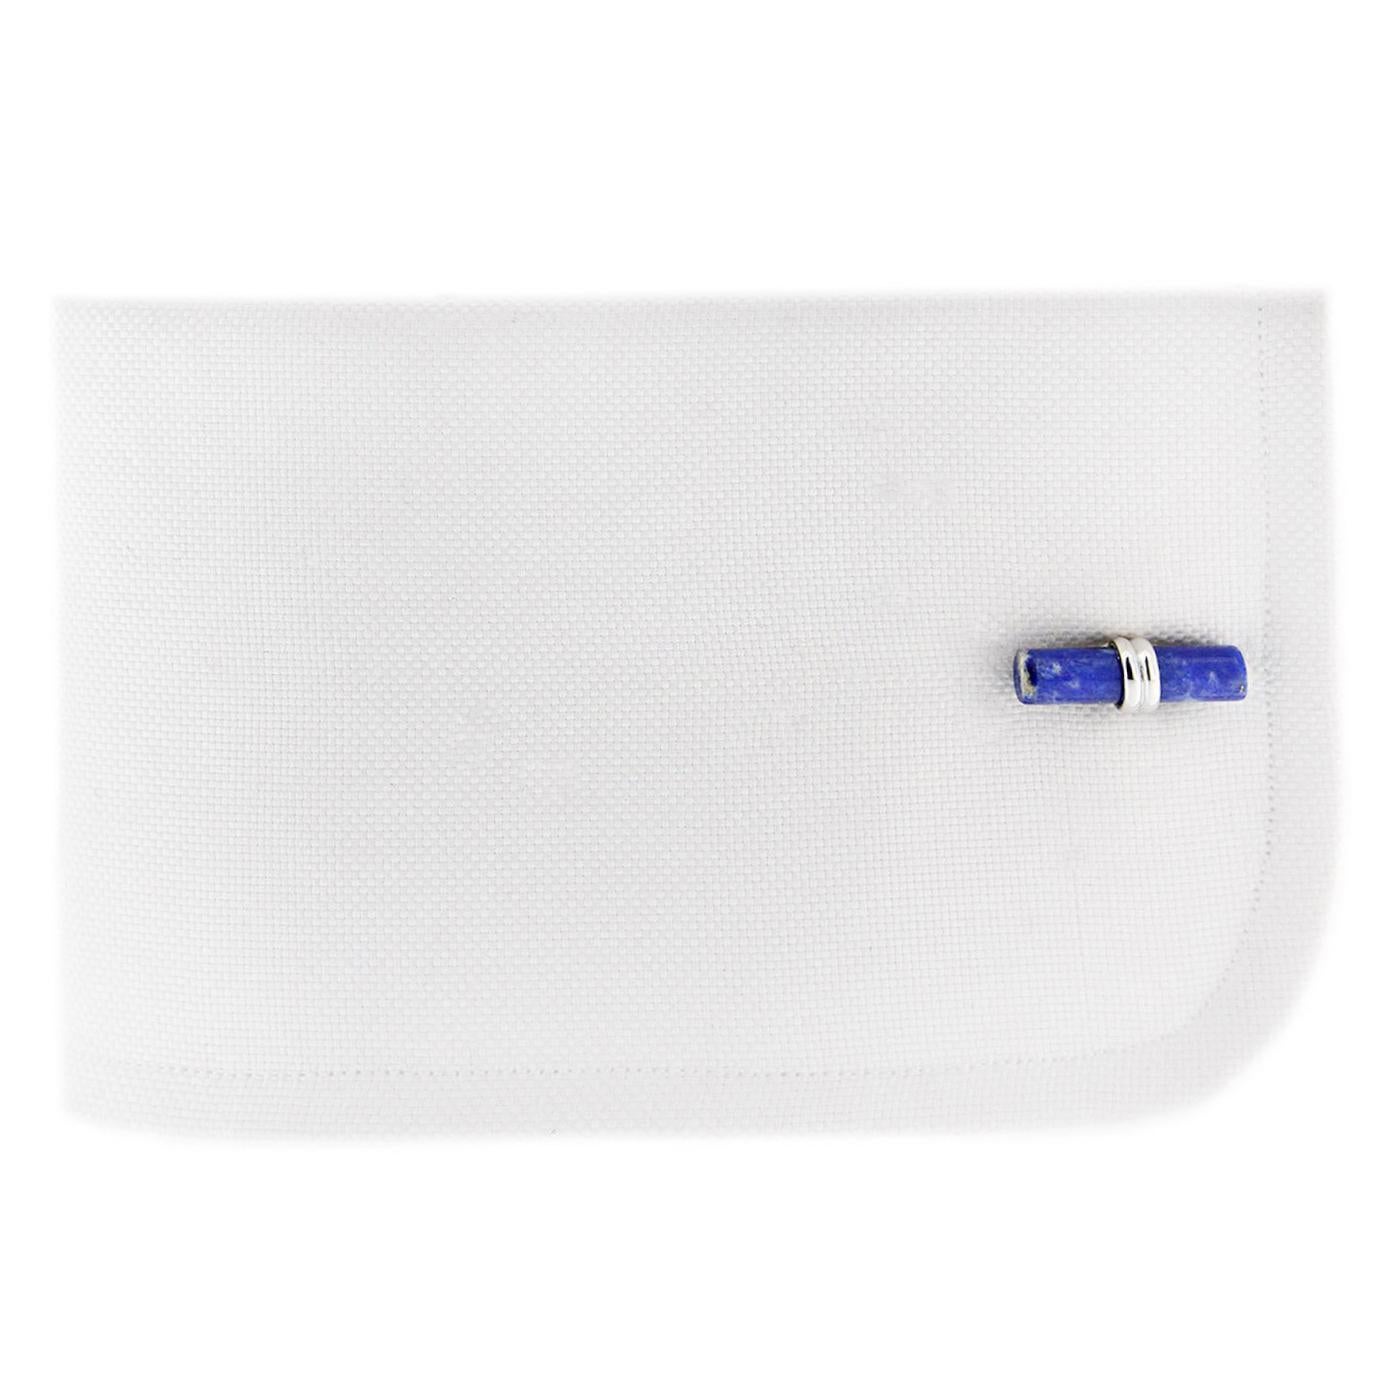 Alex Jona design collection, lapis lazuli cufflinks, mounted in 925/°°° sterling silver Rhodium Plated.    Measurements: 19.2mm x 5.4mm (each cylinder). 

Alex Jona cufflinks stand out, not only for their special design and for the excellent